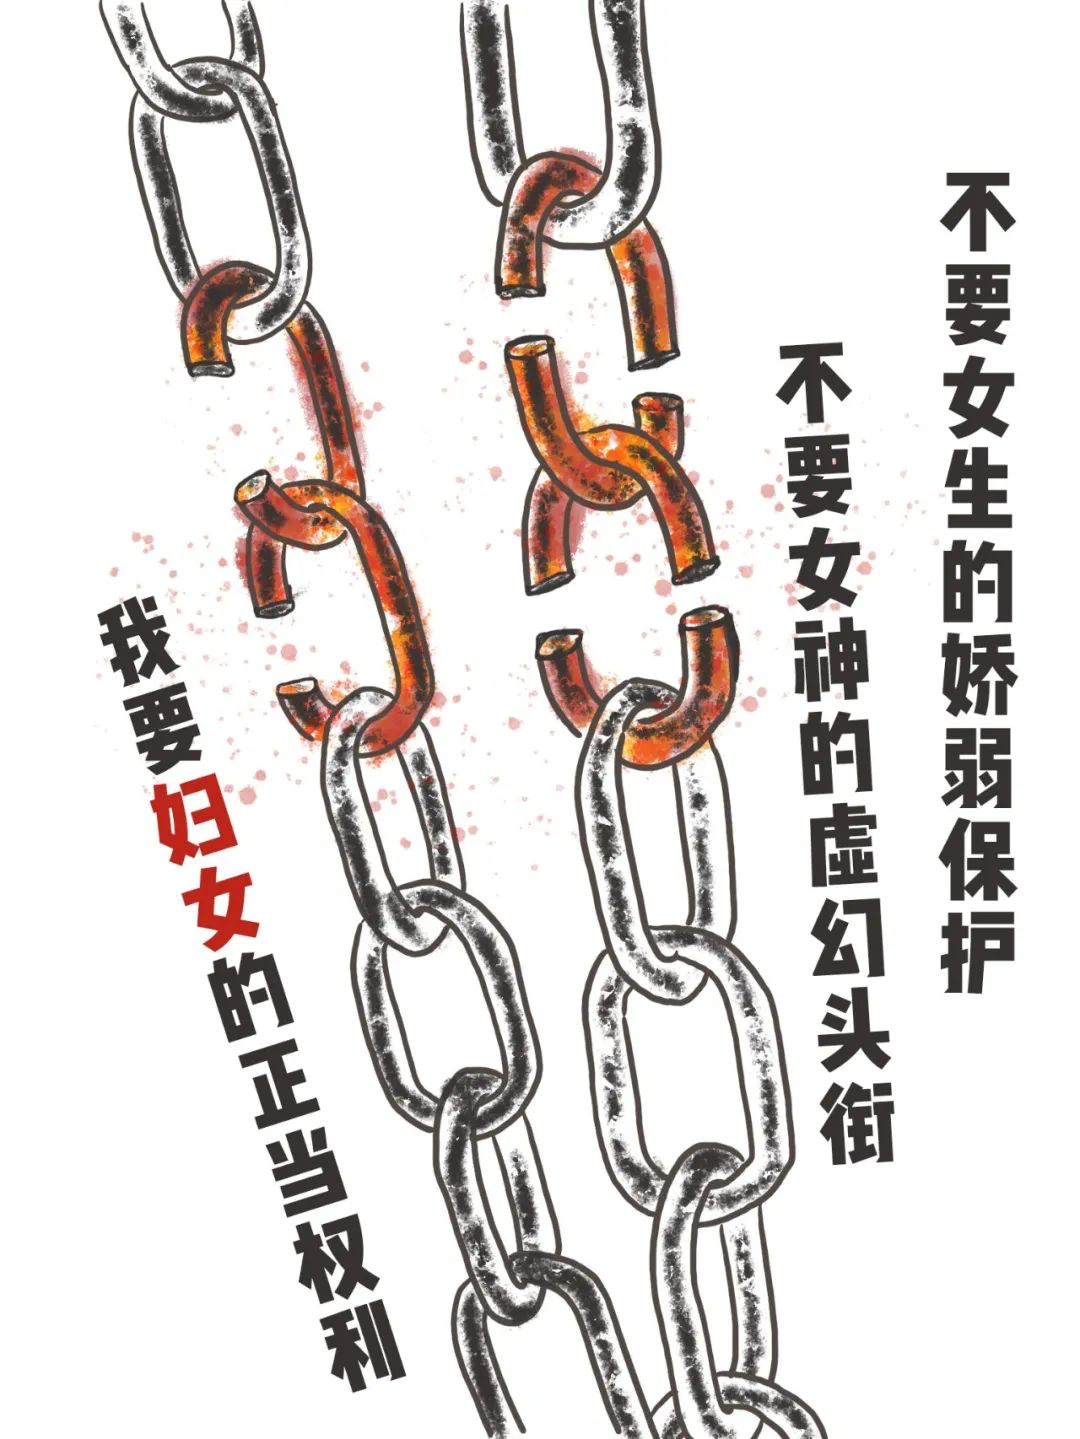 A sketch of two parallel chains with broken, rusty links run from top to bottom across this white poster. 